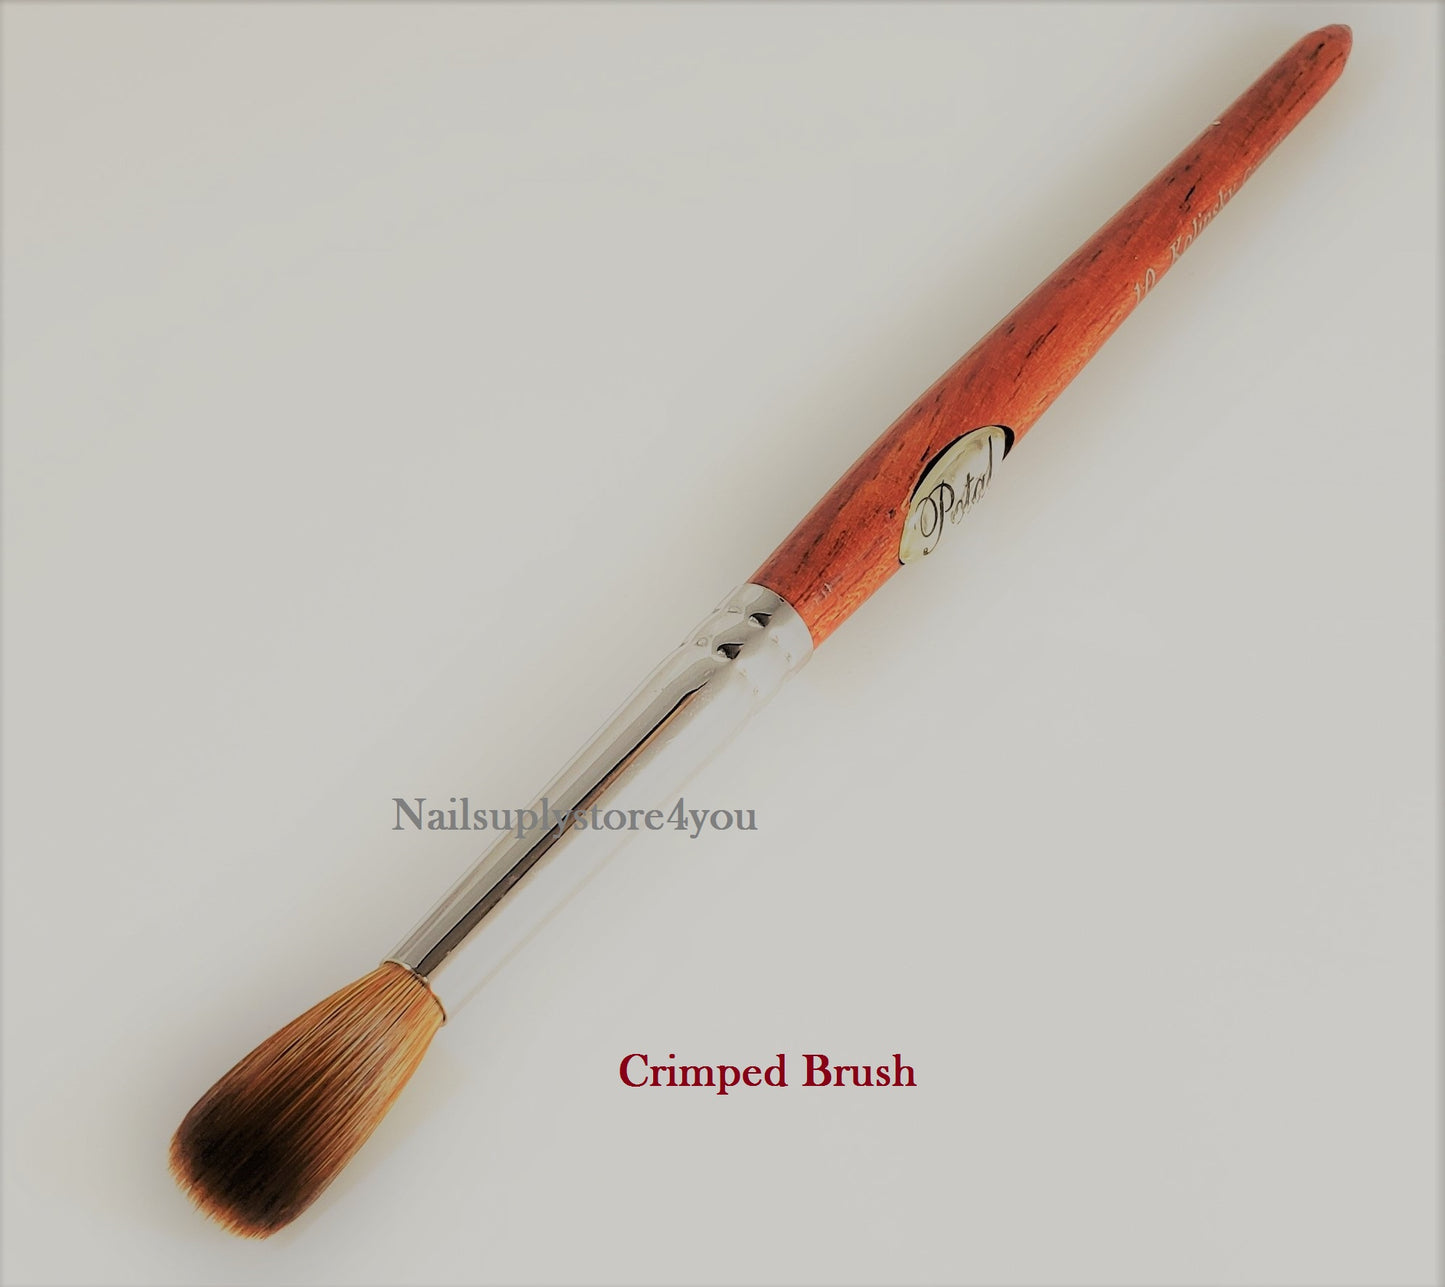 Nail Brush - Petal Red Wood Handle For Acrylic Nail Manicure Pedicure Powder  (CRIMPED)